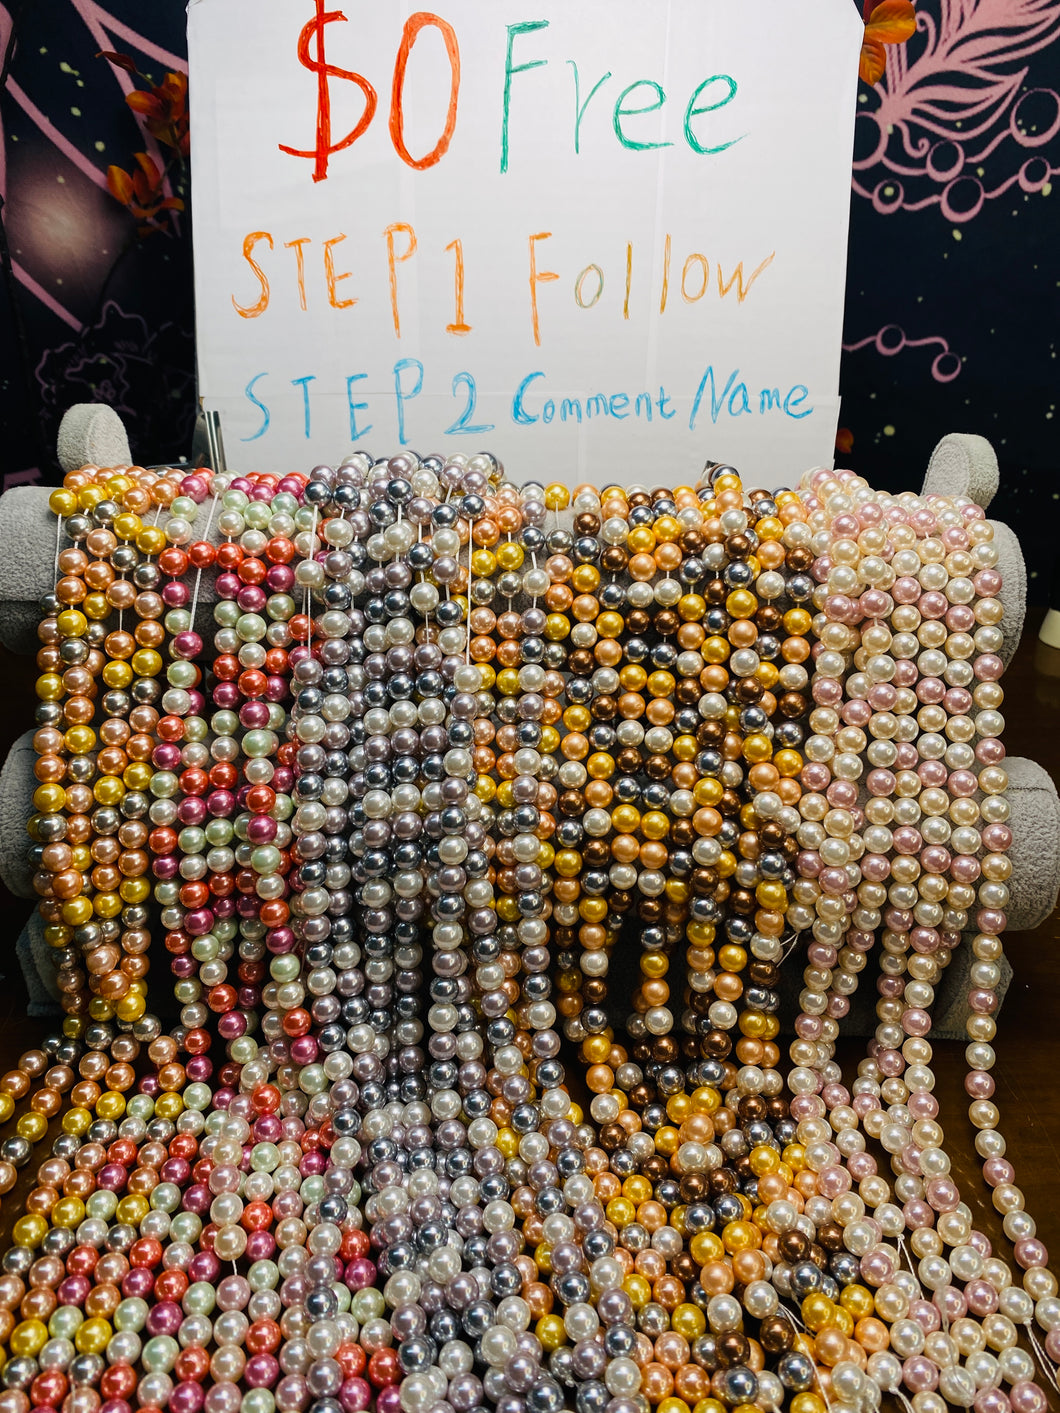 (NEW STORE OPENING)Free Gift for Followers!! A string of pearls for free